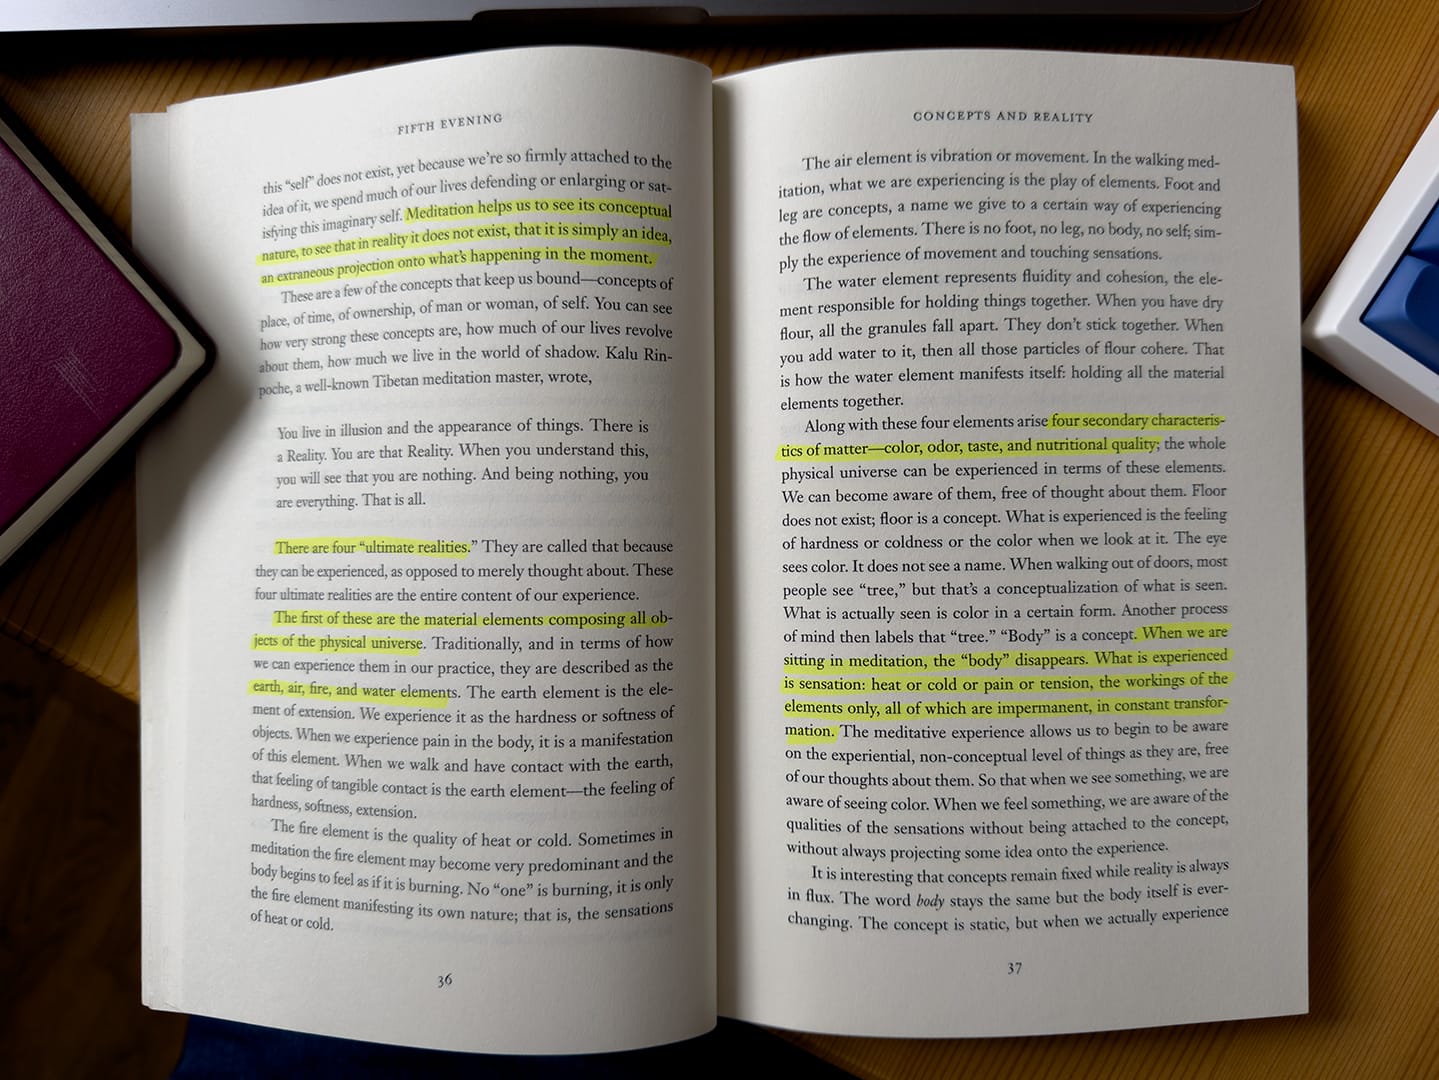 Highlighting: The Secret Weapon to Note-taking and PKM